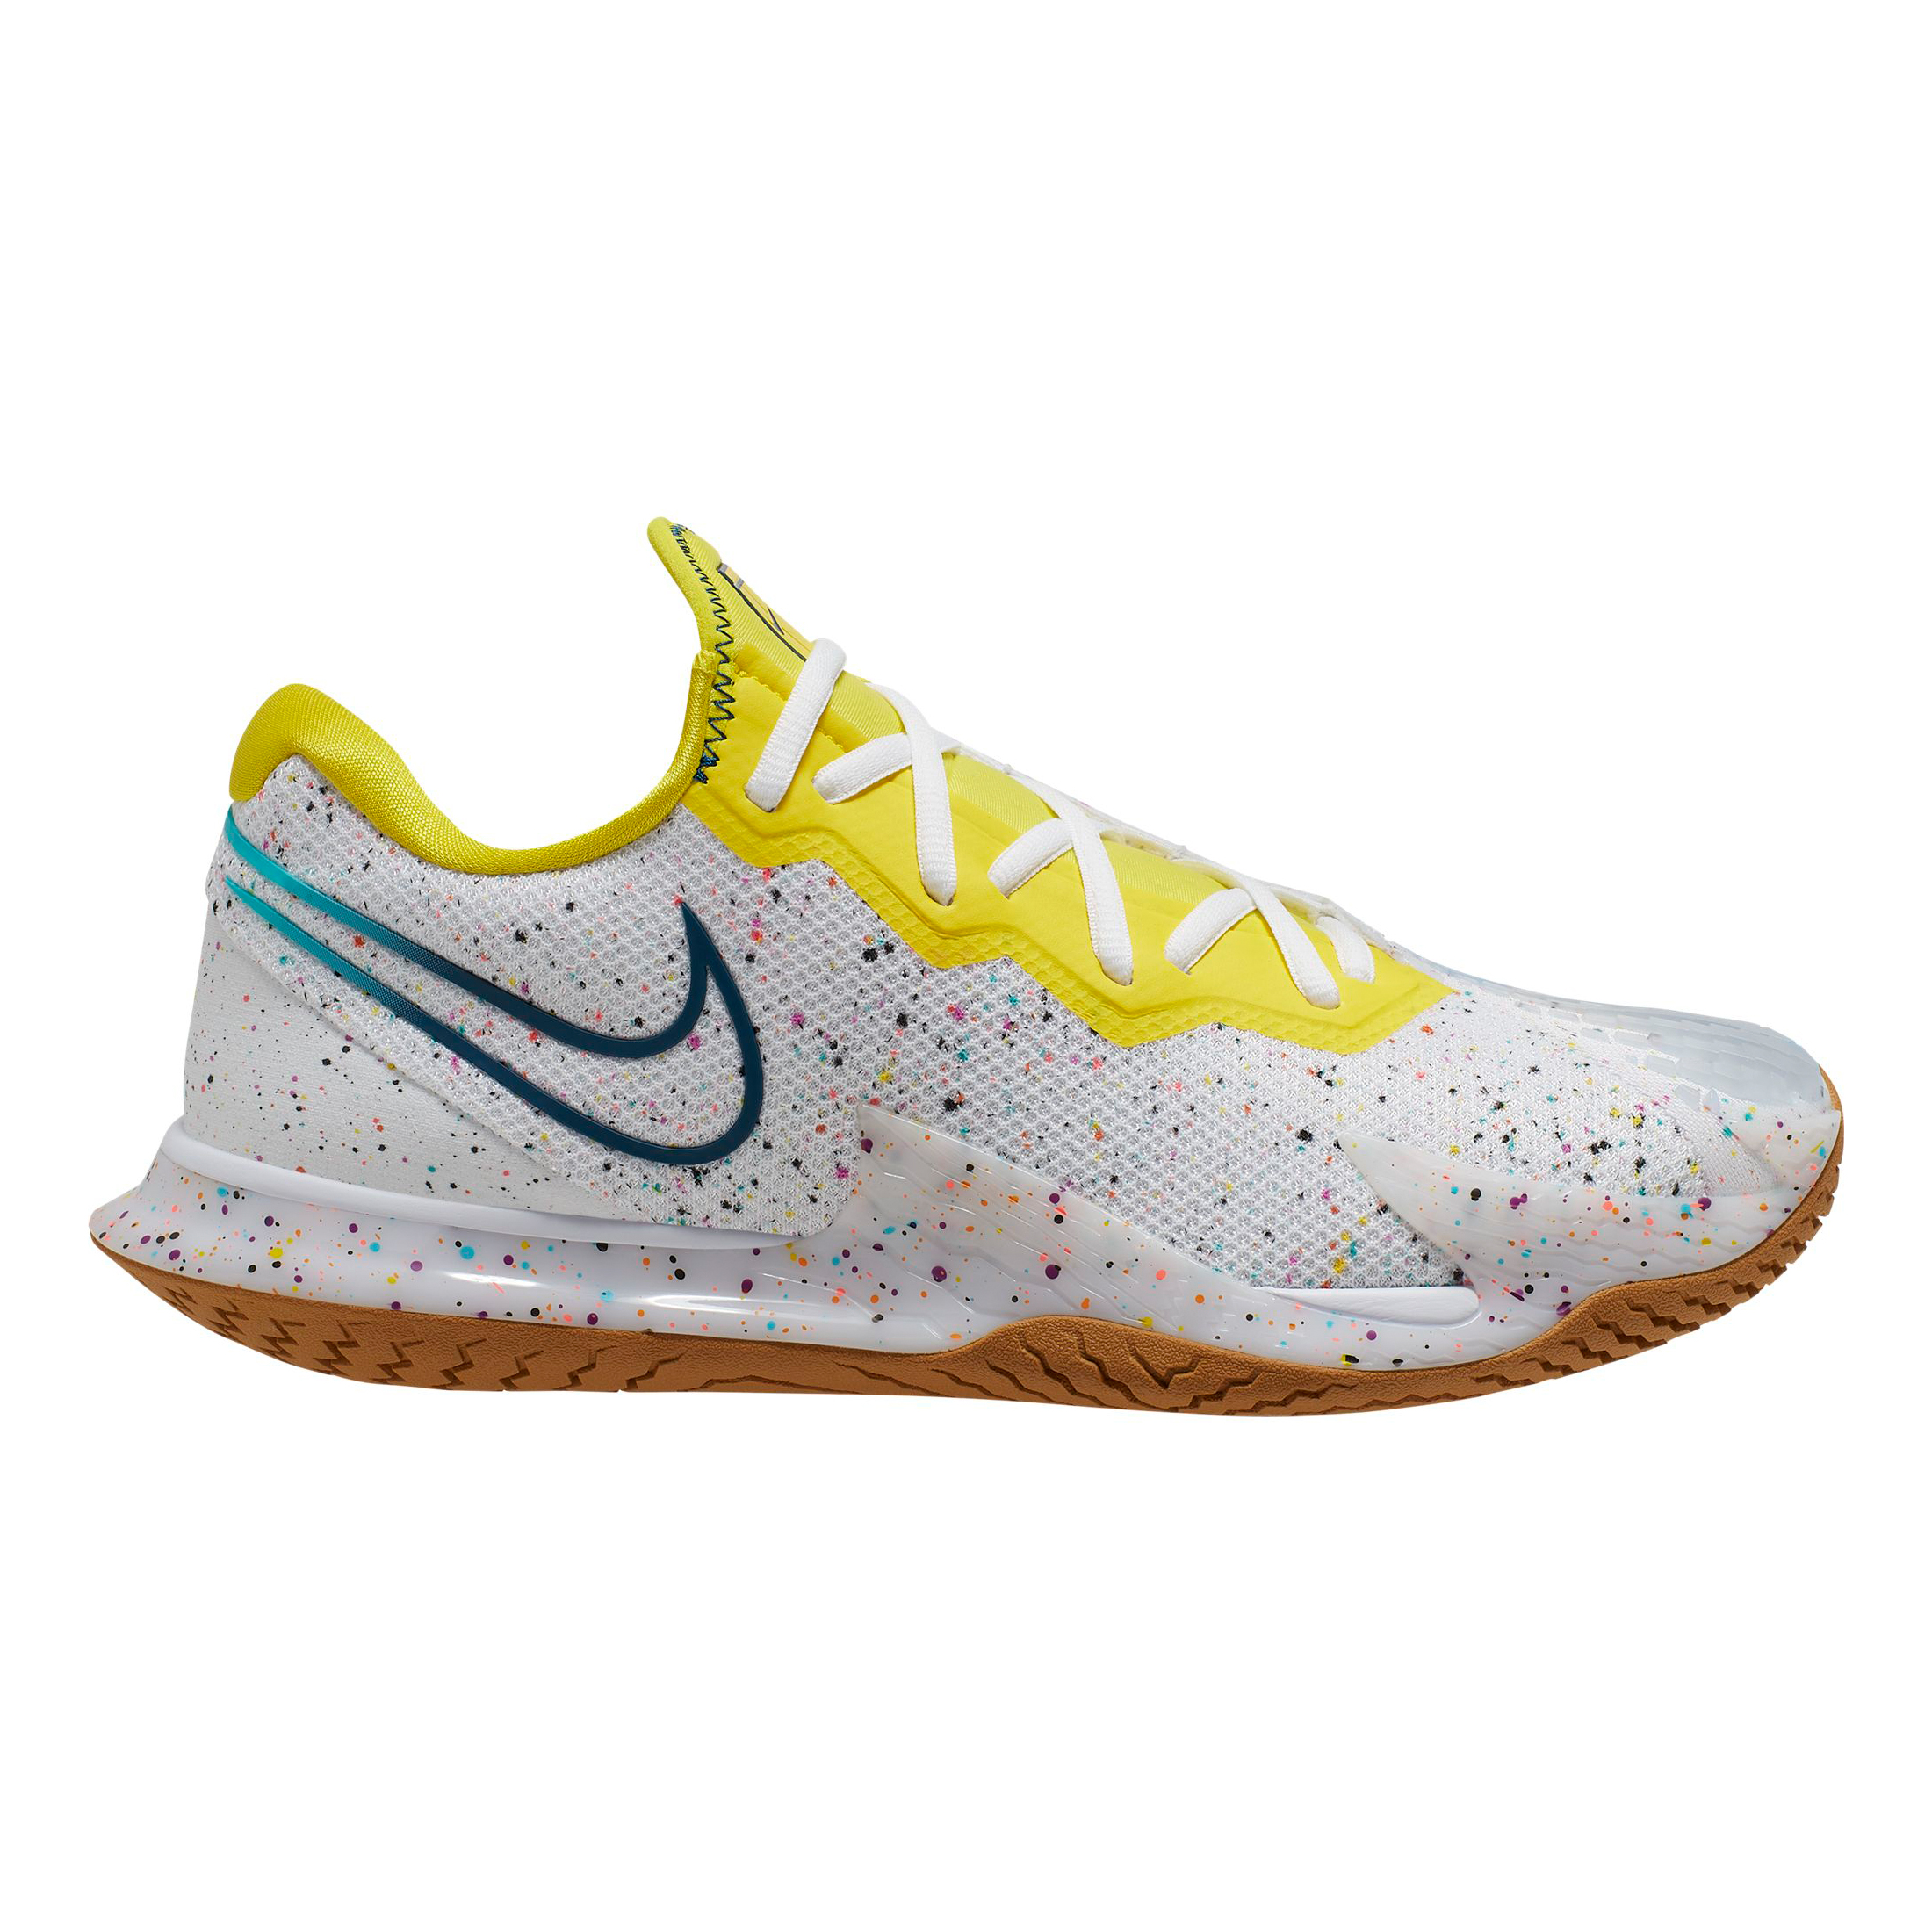 Nike-melbourne-styles-2020 compra | Tennis-Point